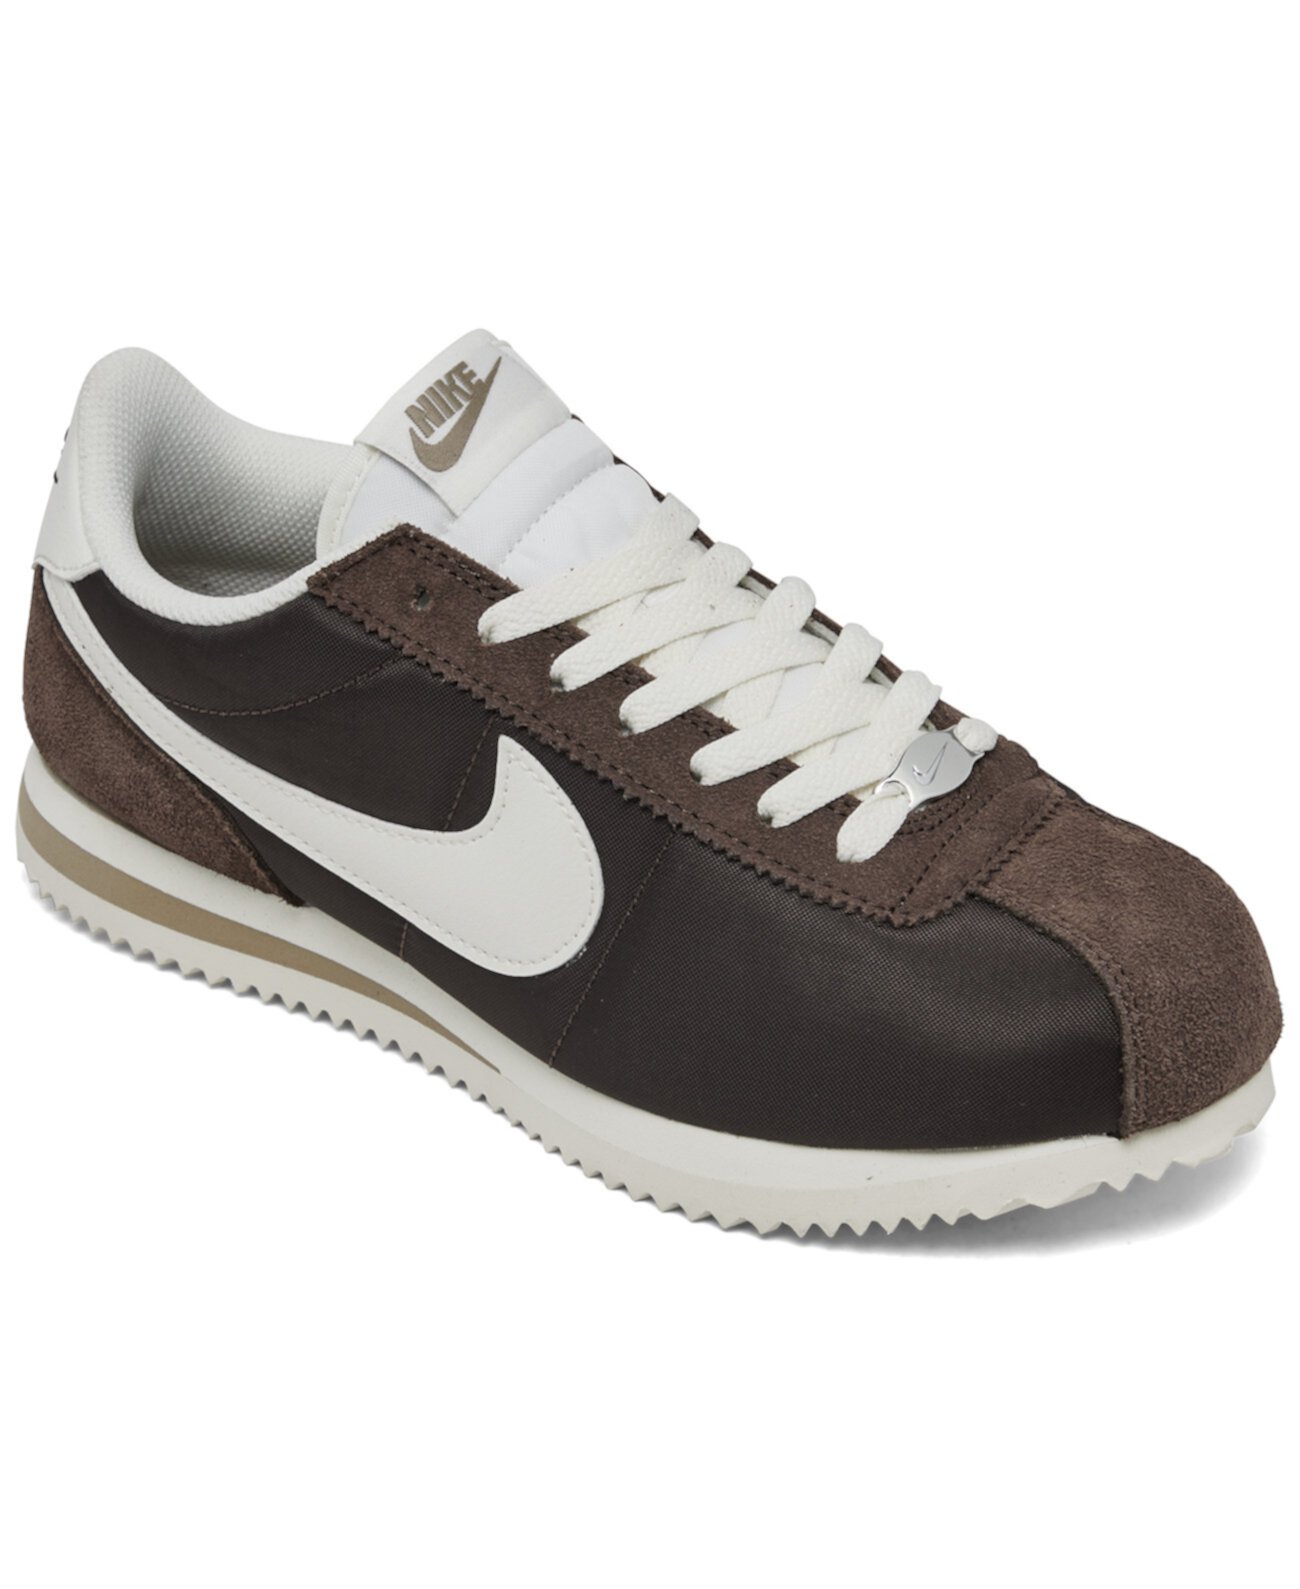 Women's Classic Cortez Textile Casual Sneakers from Finish Line Nike